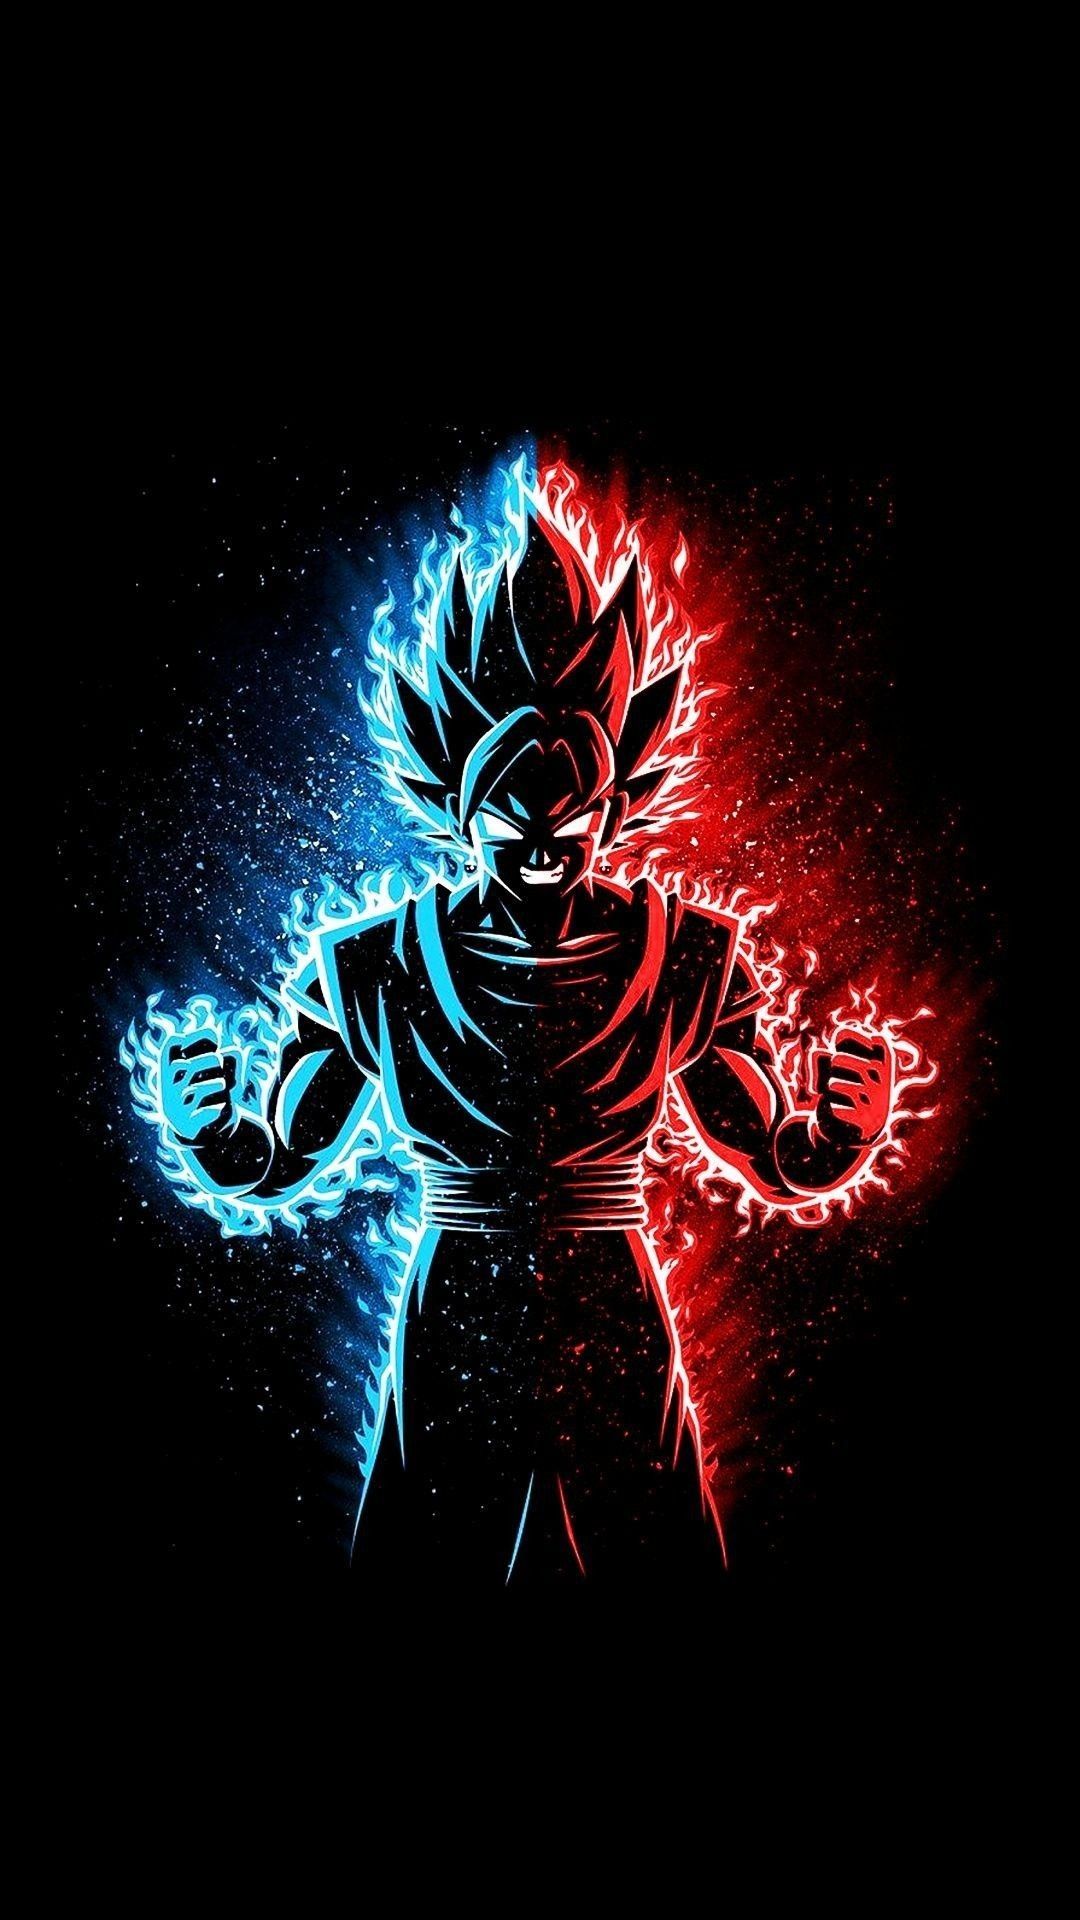 Awesome Dragon Ball Z Cell Phone Wallpaper. Dragon ball artwork, Dragon ball super wallpaper, Dragon ball super